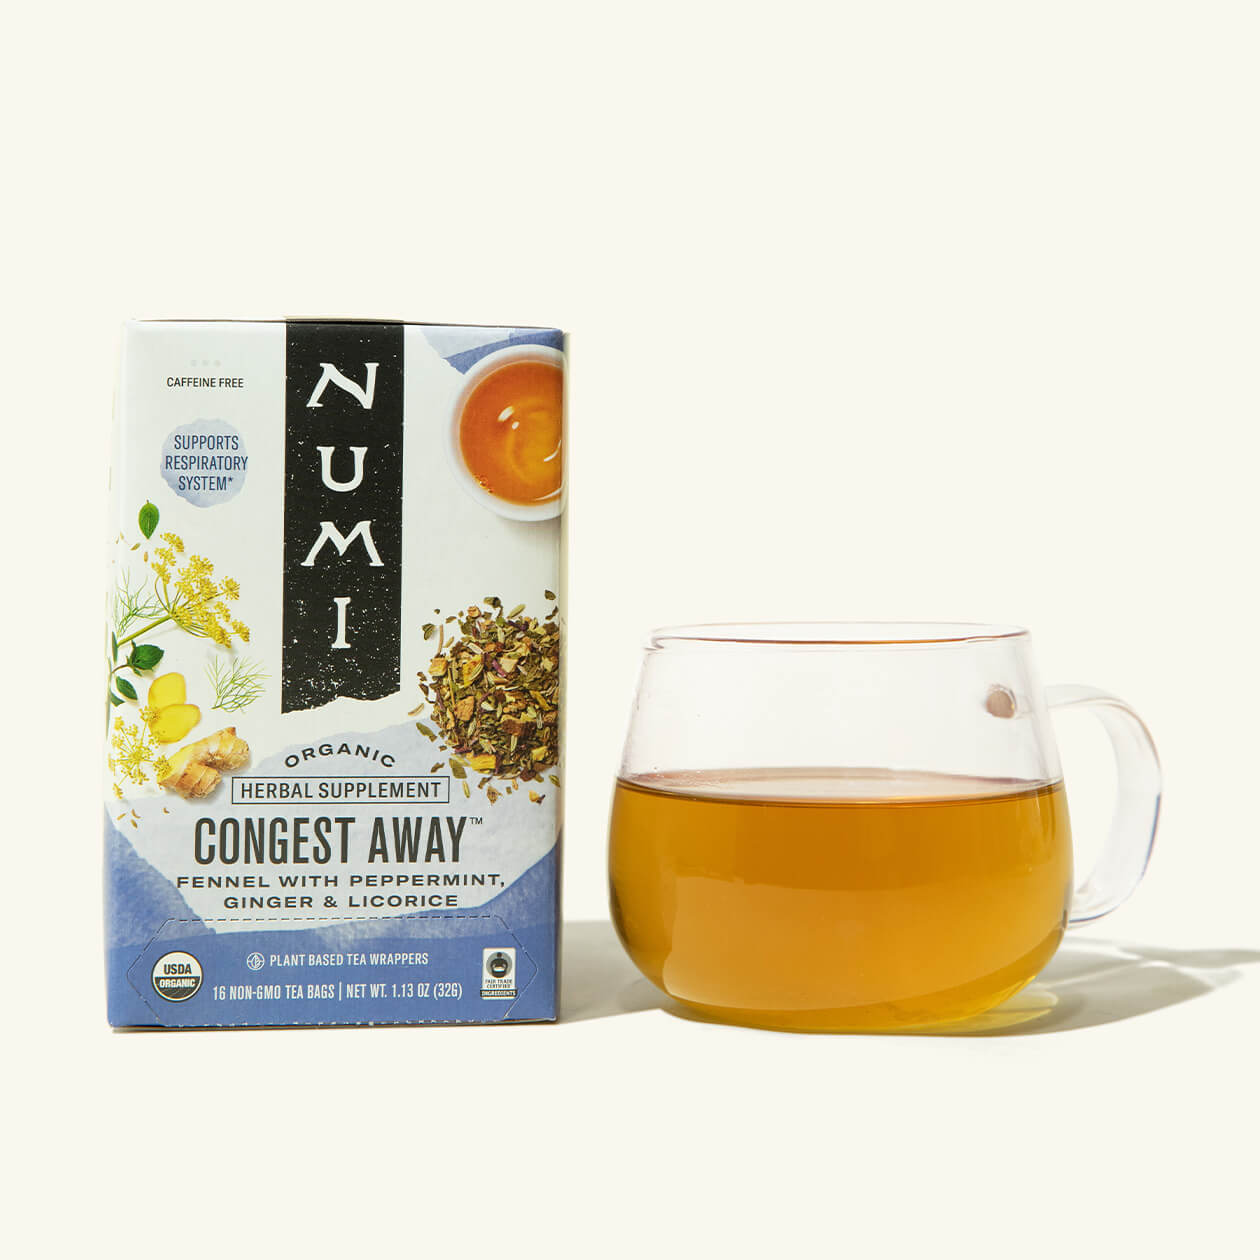 A box of Numi's Congest Away next to a brewed cup of tea in a clear cup